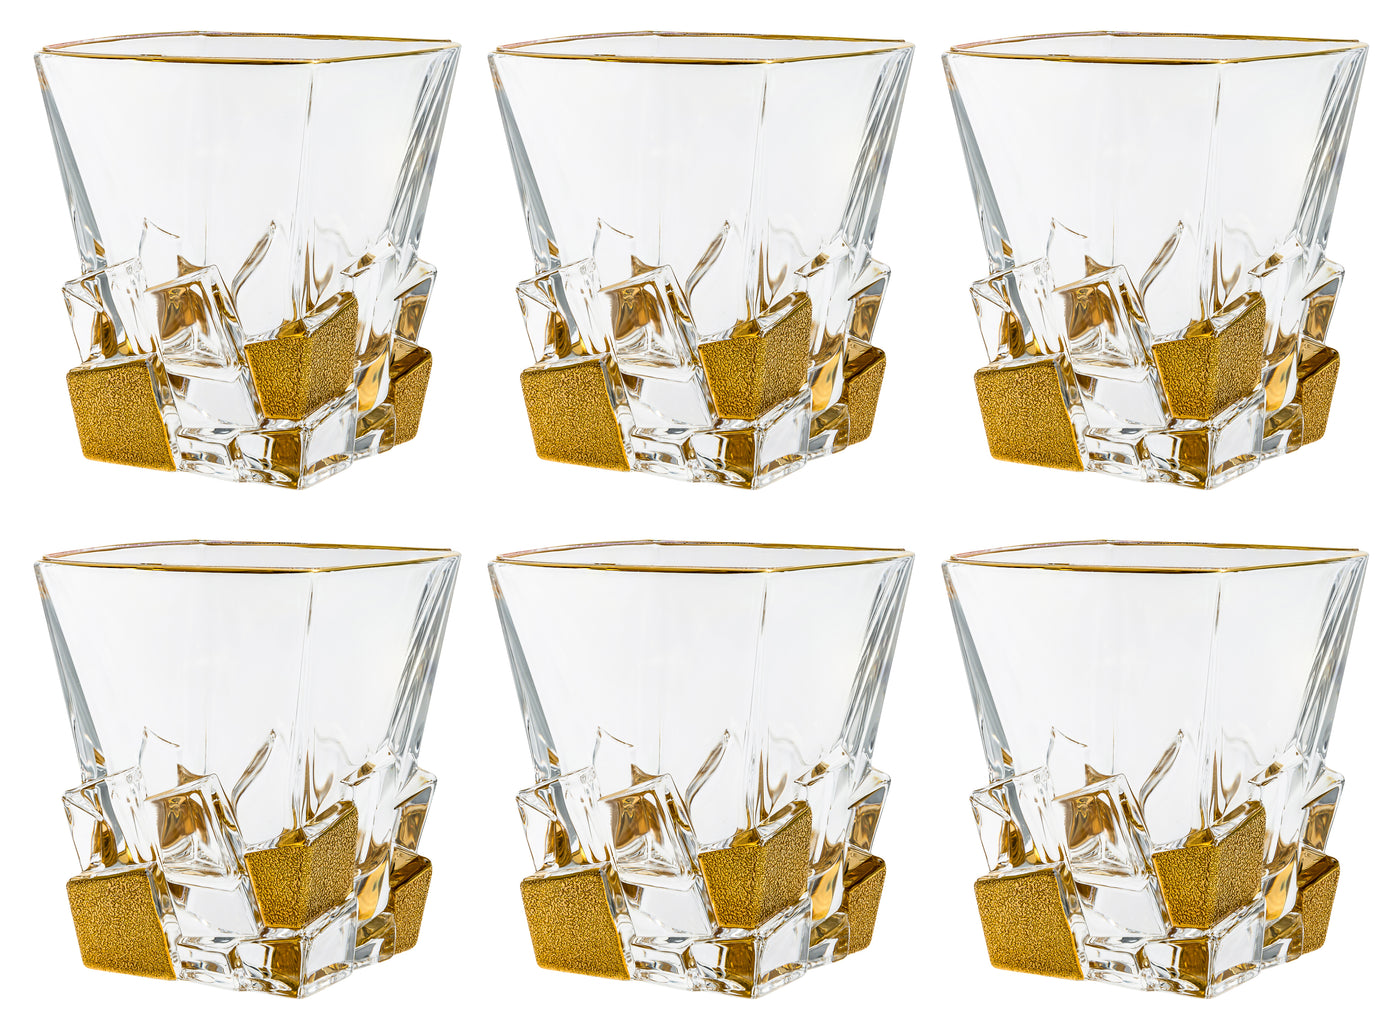 Whiskey Glasses, Set of 4, Old Fashioned Crystal Rocks Glasses, 10 Oz  Barware for Cocktails, Bourbon, Scotch Whiskey, Cognac Drinks, with Luxury  Box,Square Pattern 